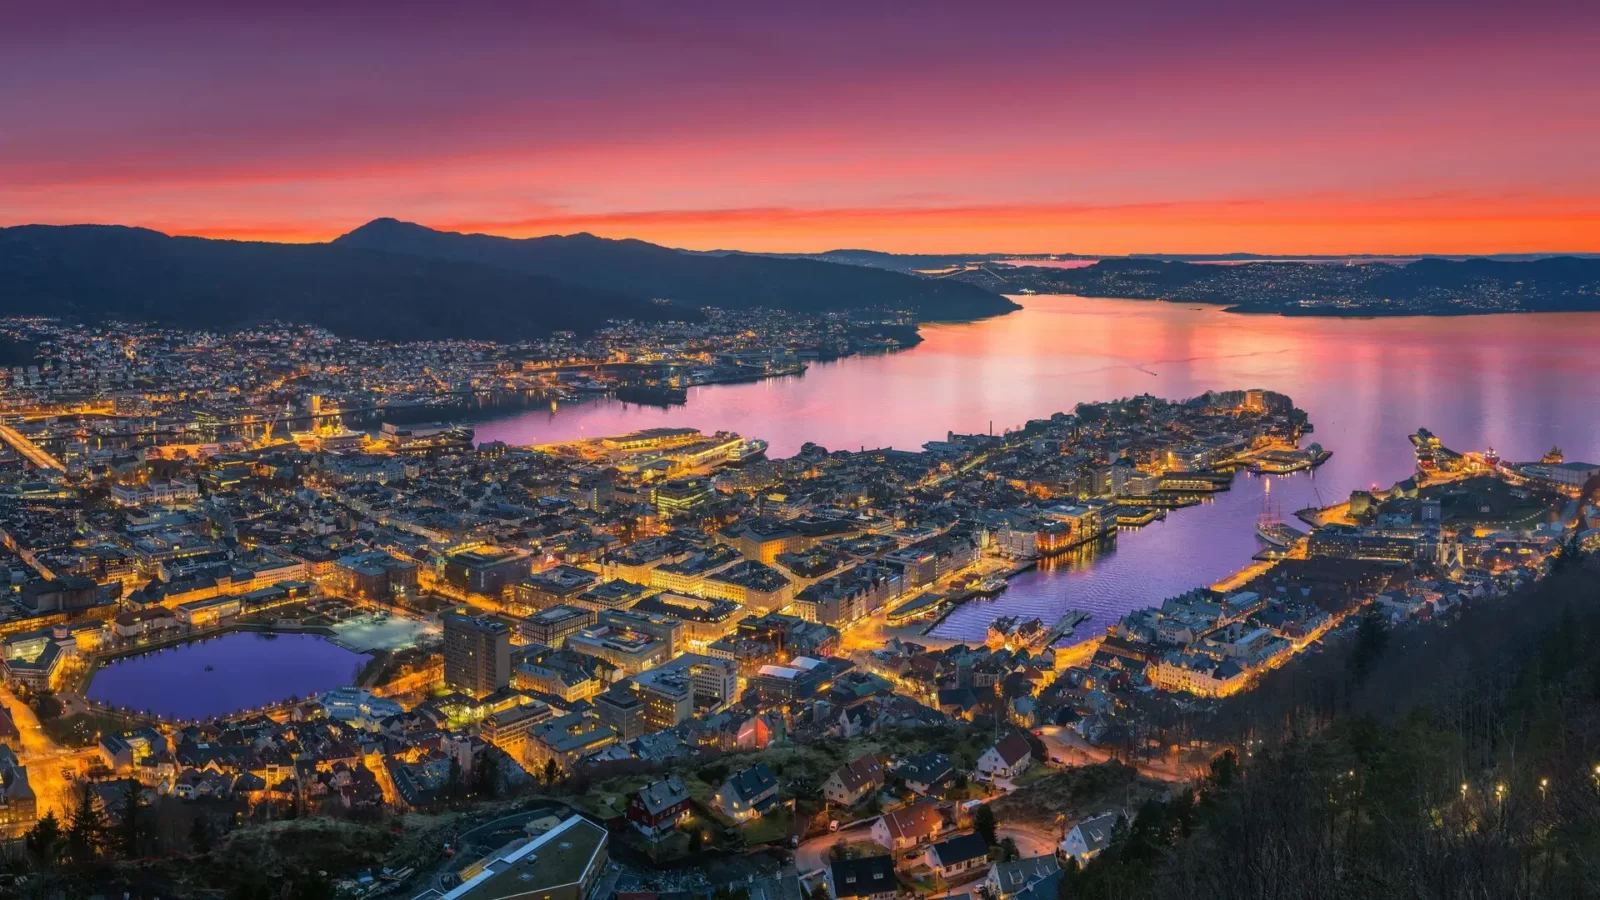 Sunset at Bergen, Norway